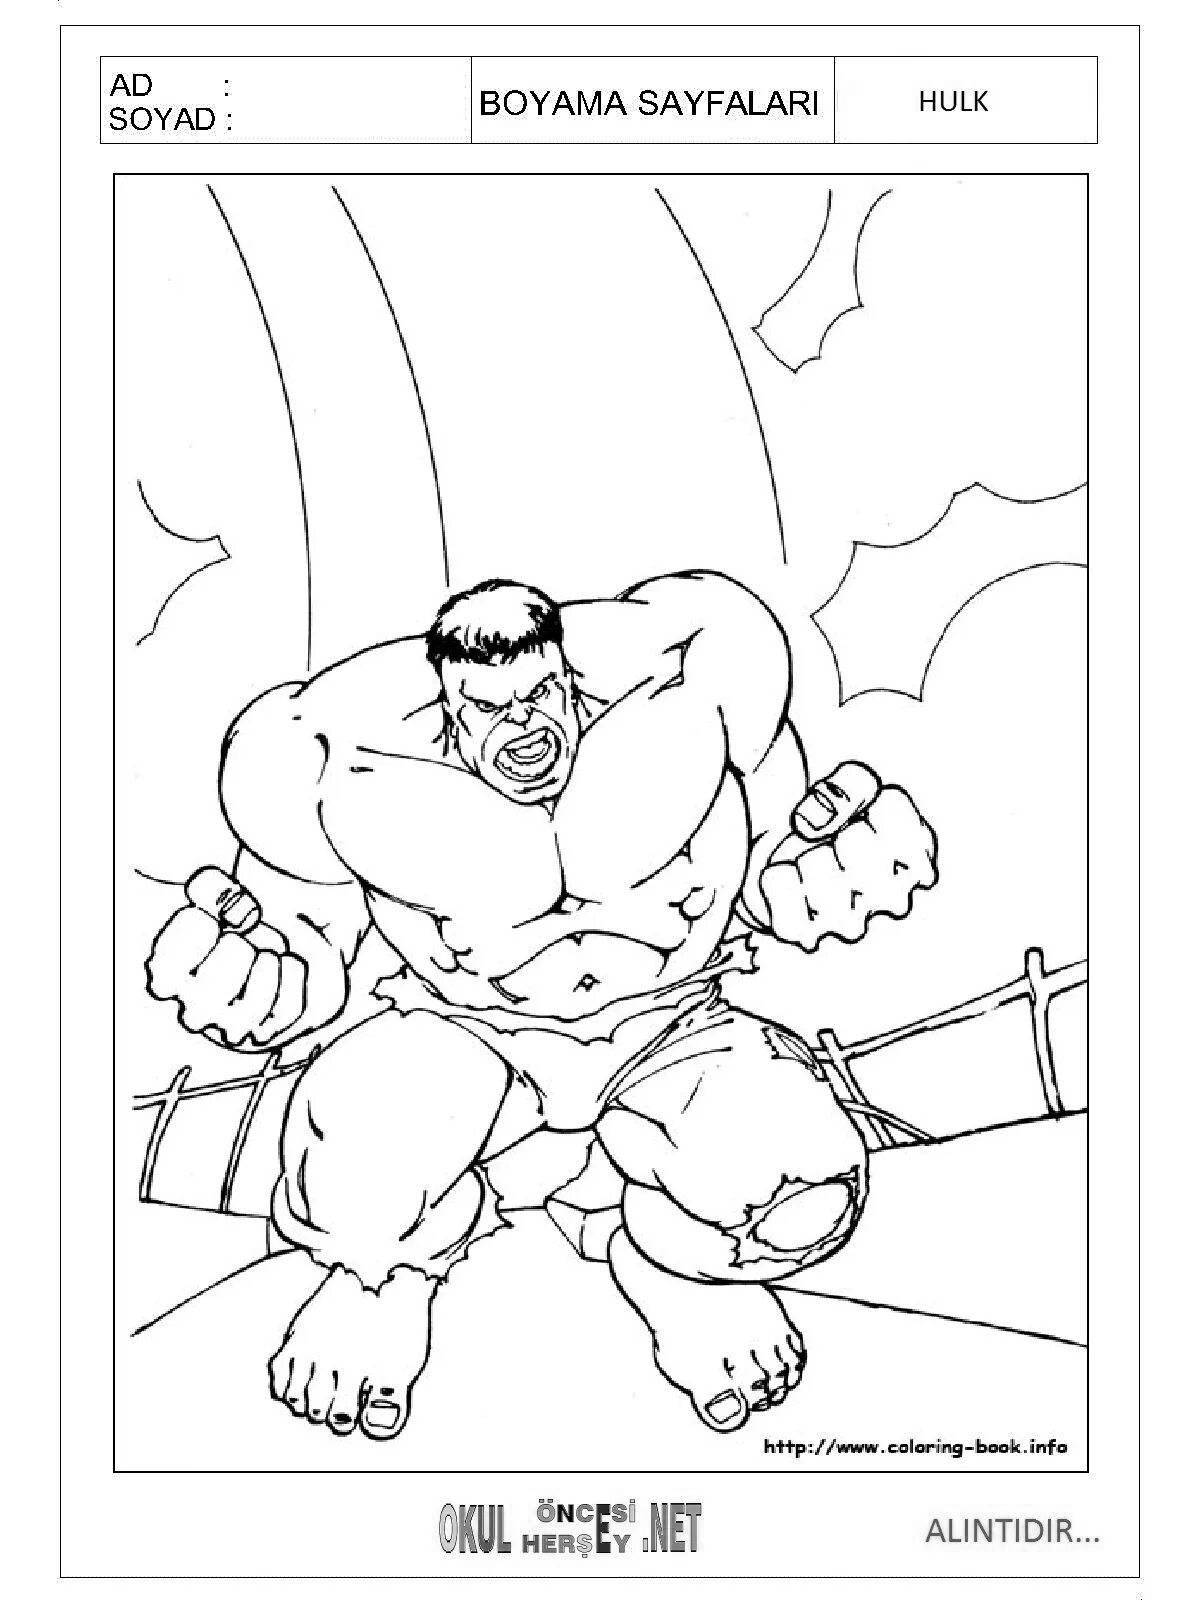 Hulk coloring book for children 4-5 years old